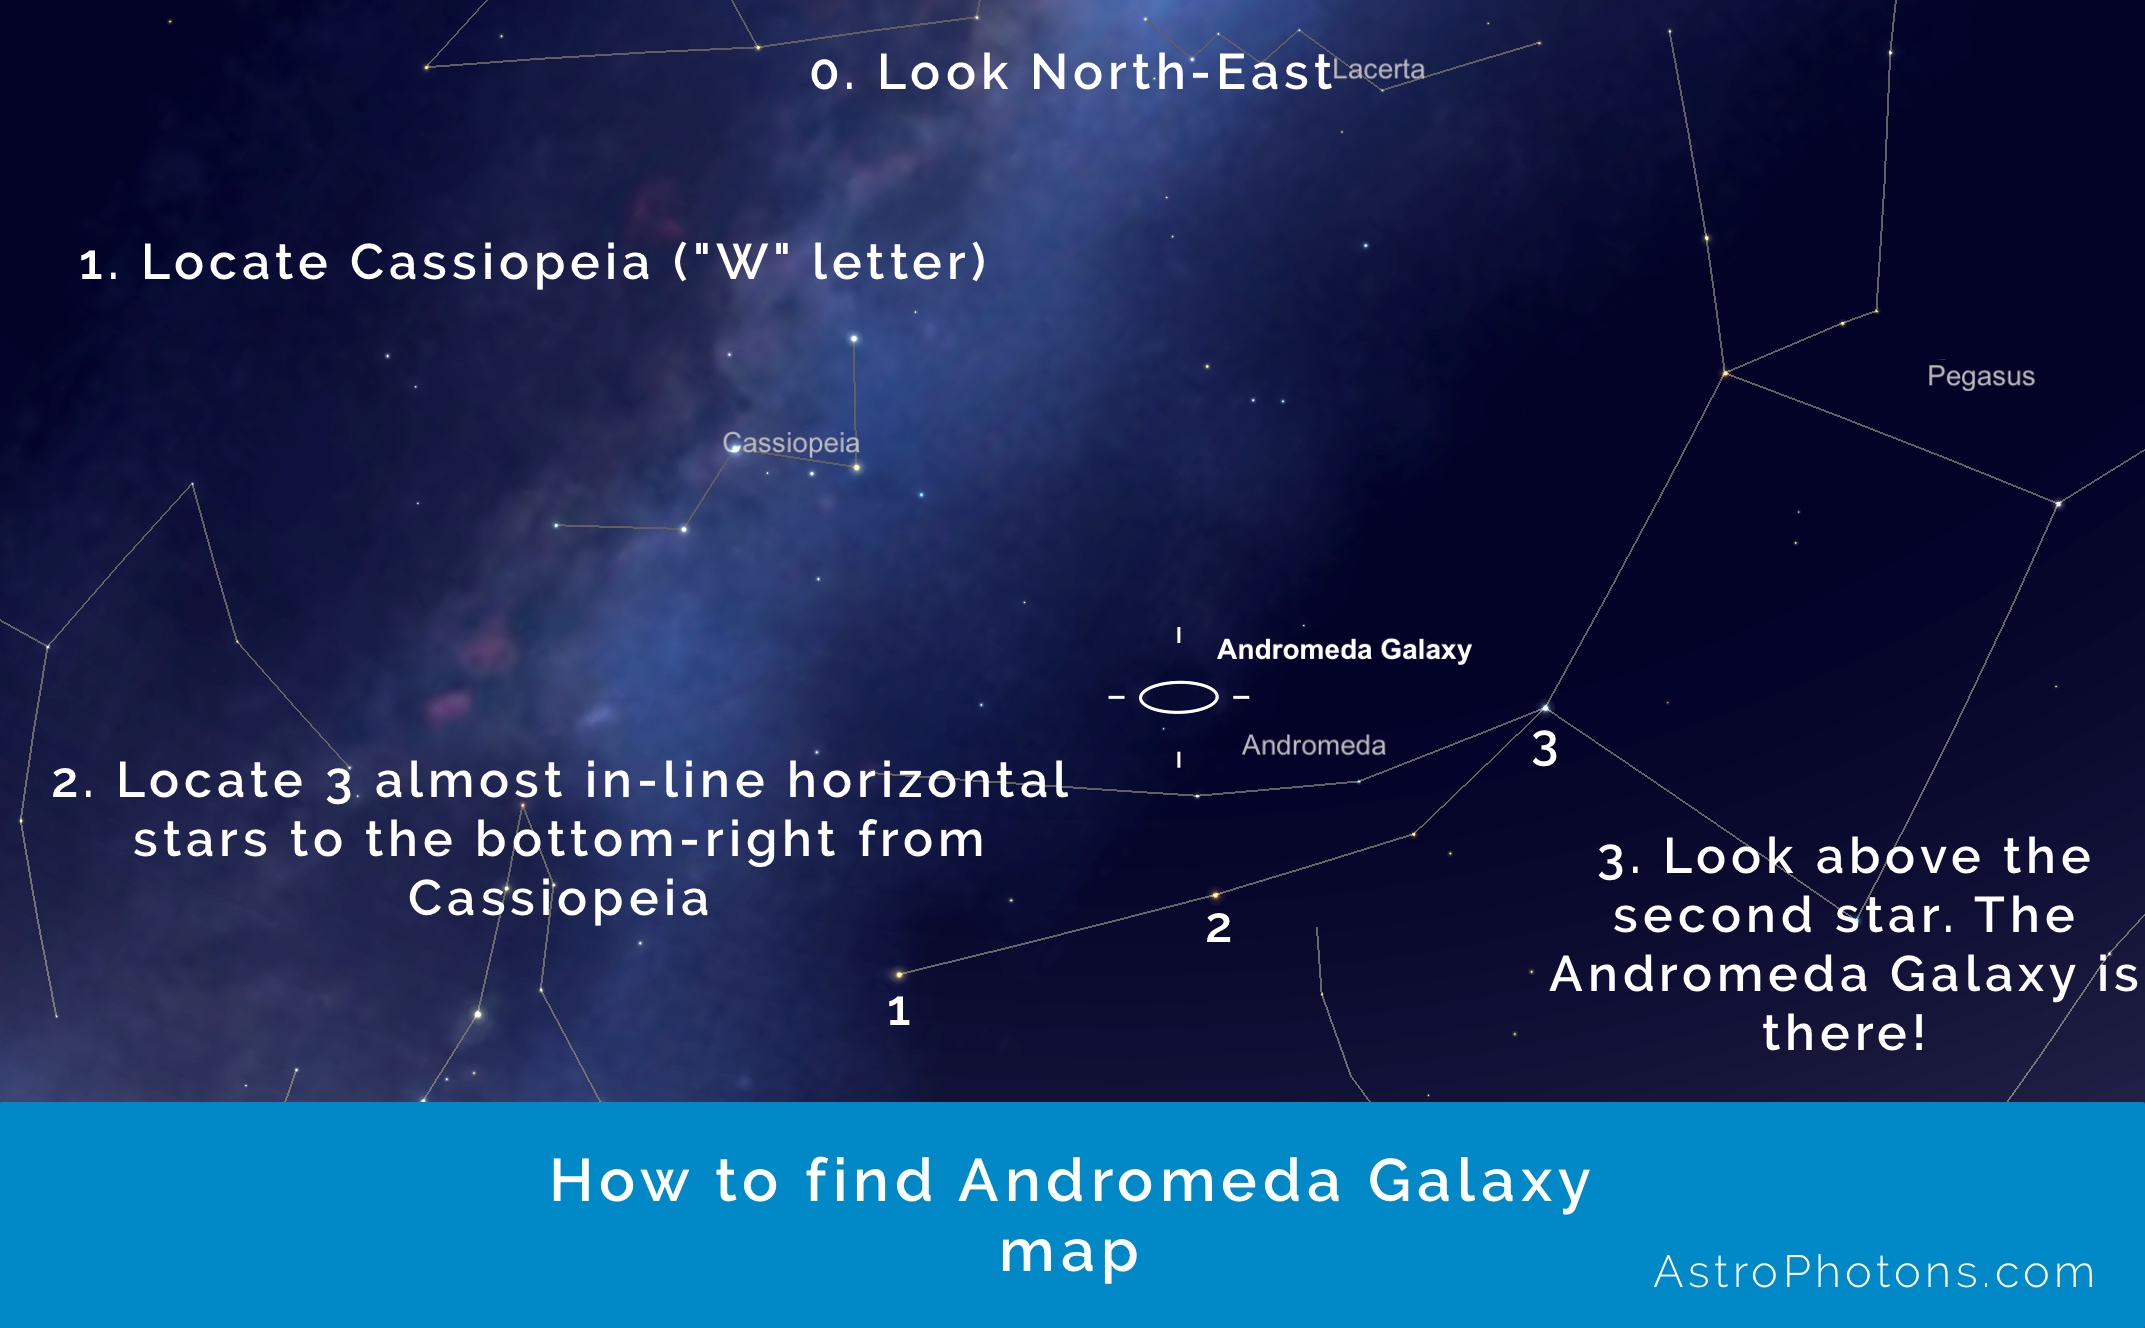 How to find Andromeda Galaxy map